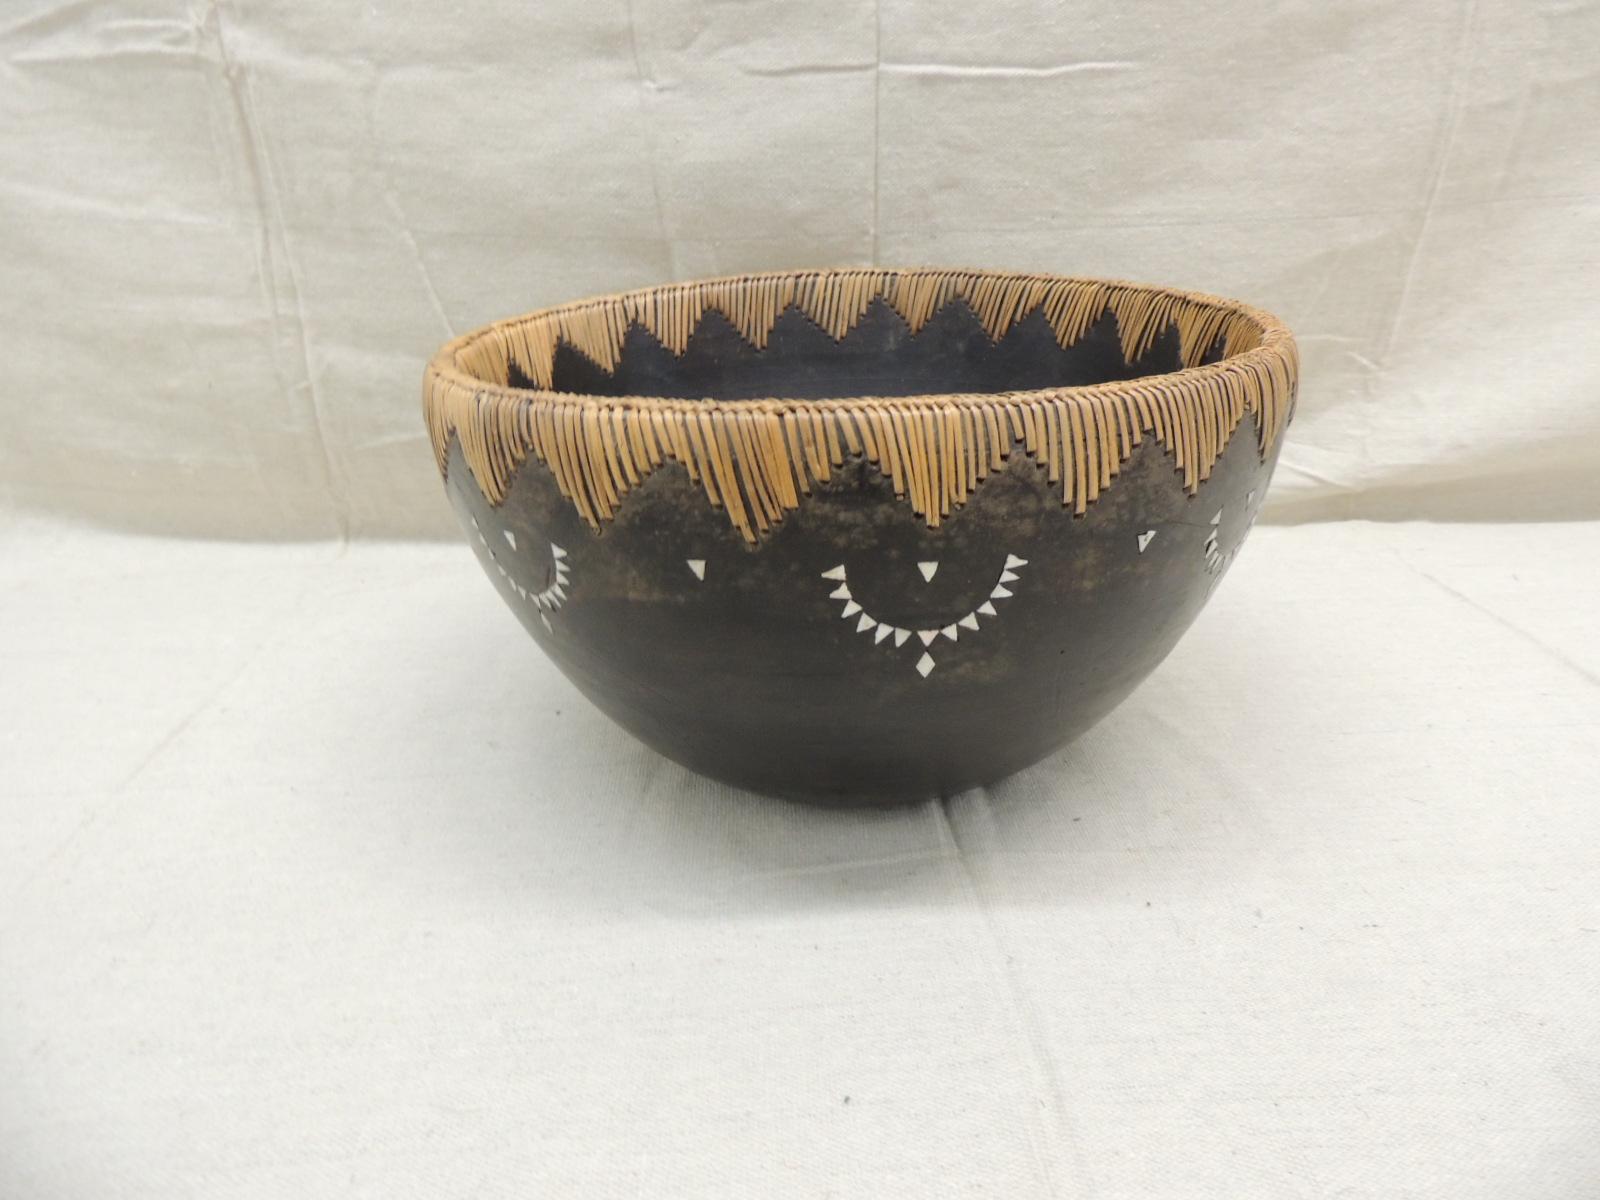 Vintage Asian carved wood bowl
with rattan details and mother of pearl inlaid embellishments inside and around outer edges.
Size: 11.5